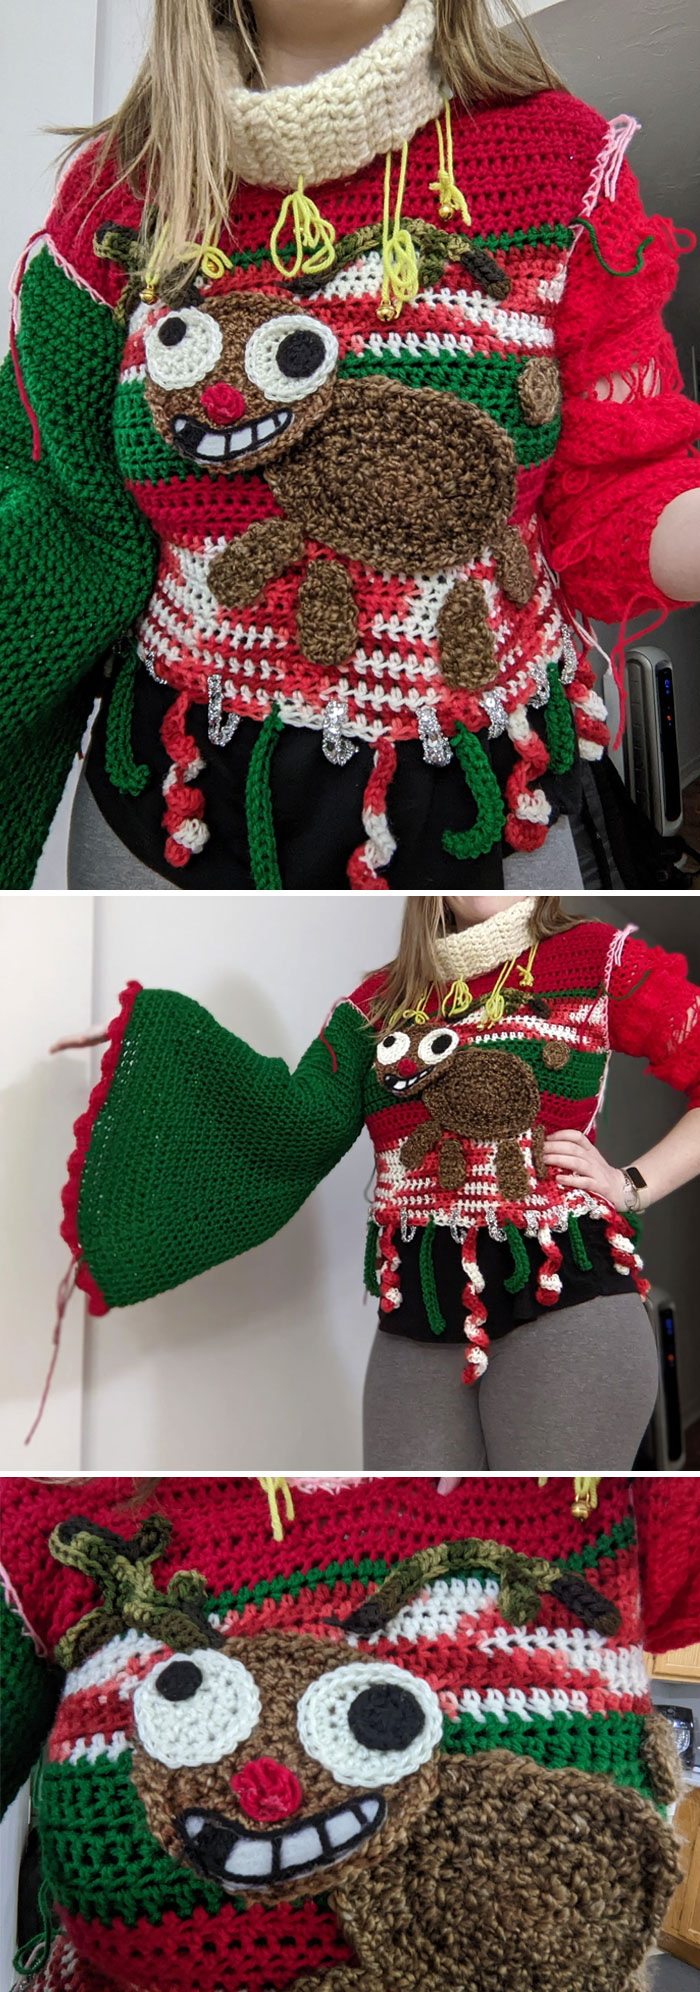 Ugly Christmas Sweater Contest You Say? I Crocheted The Entire Thing With No Idea How You're Actually Supposed To Make A Sweater. I Won